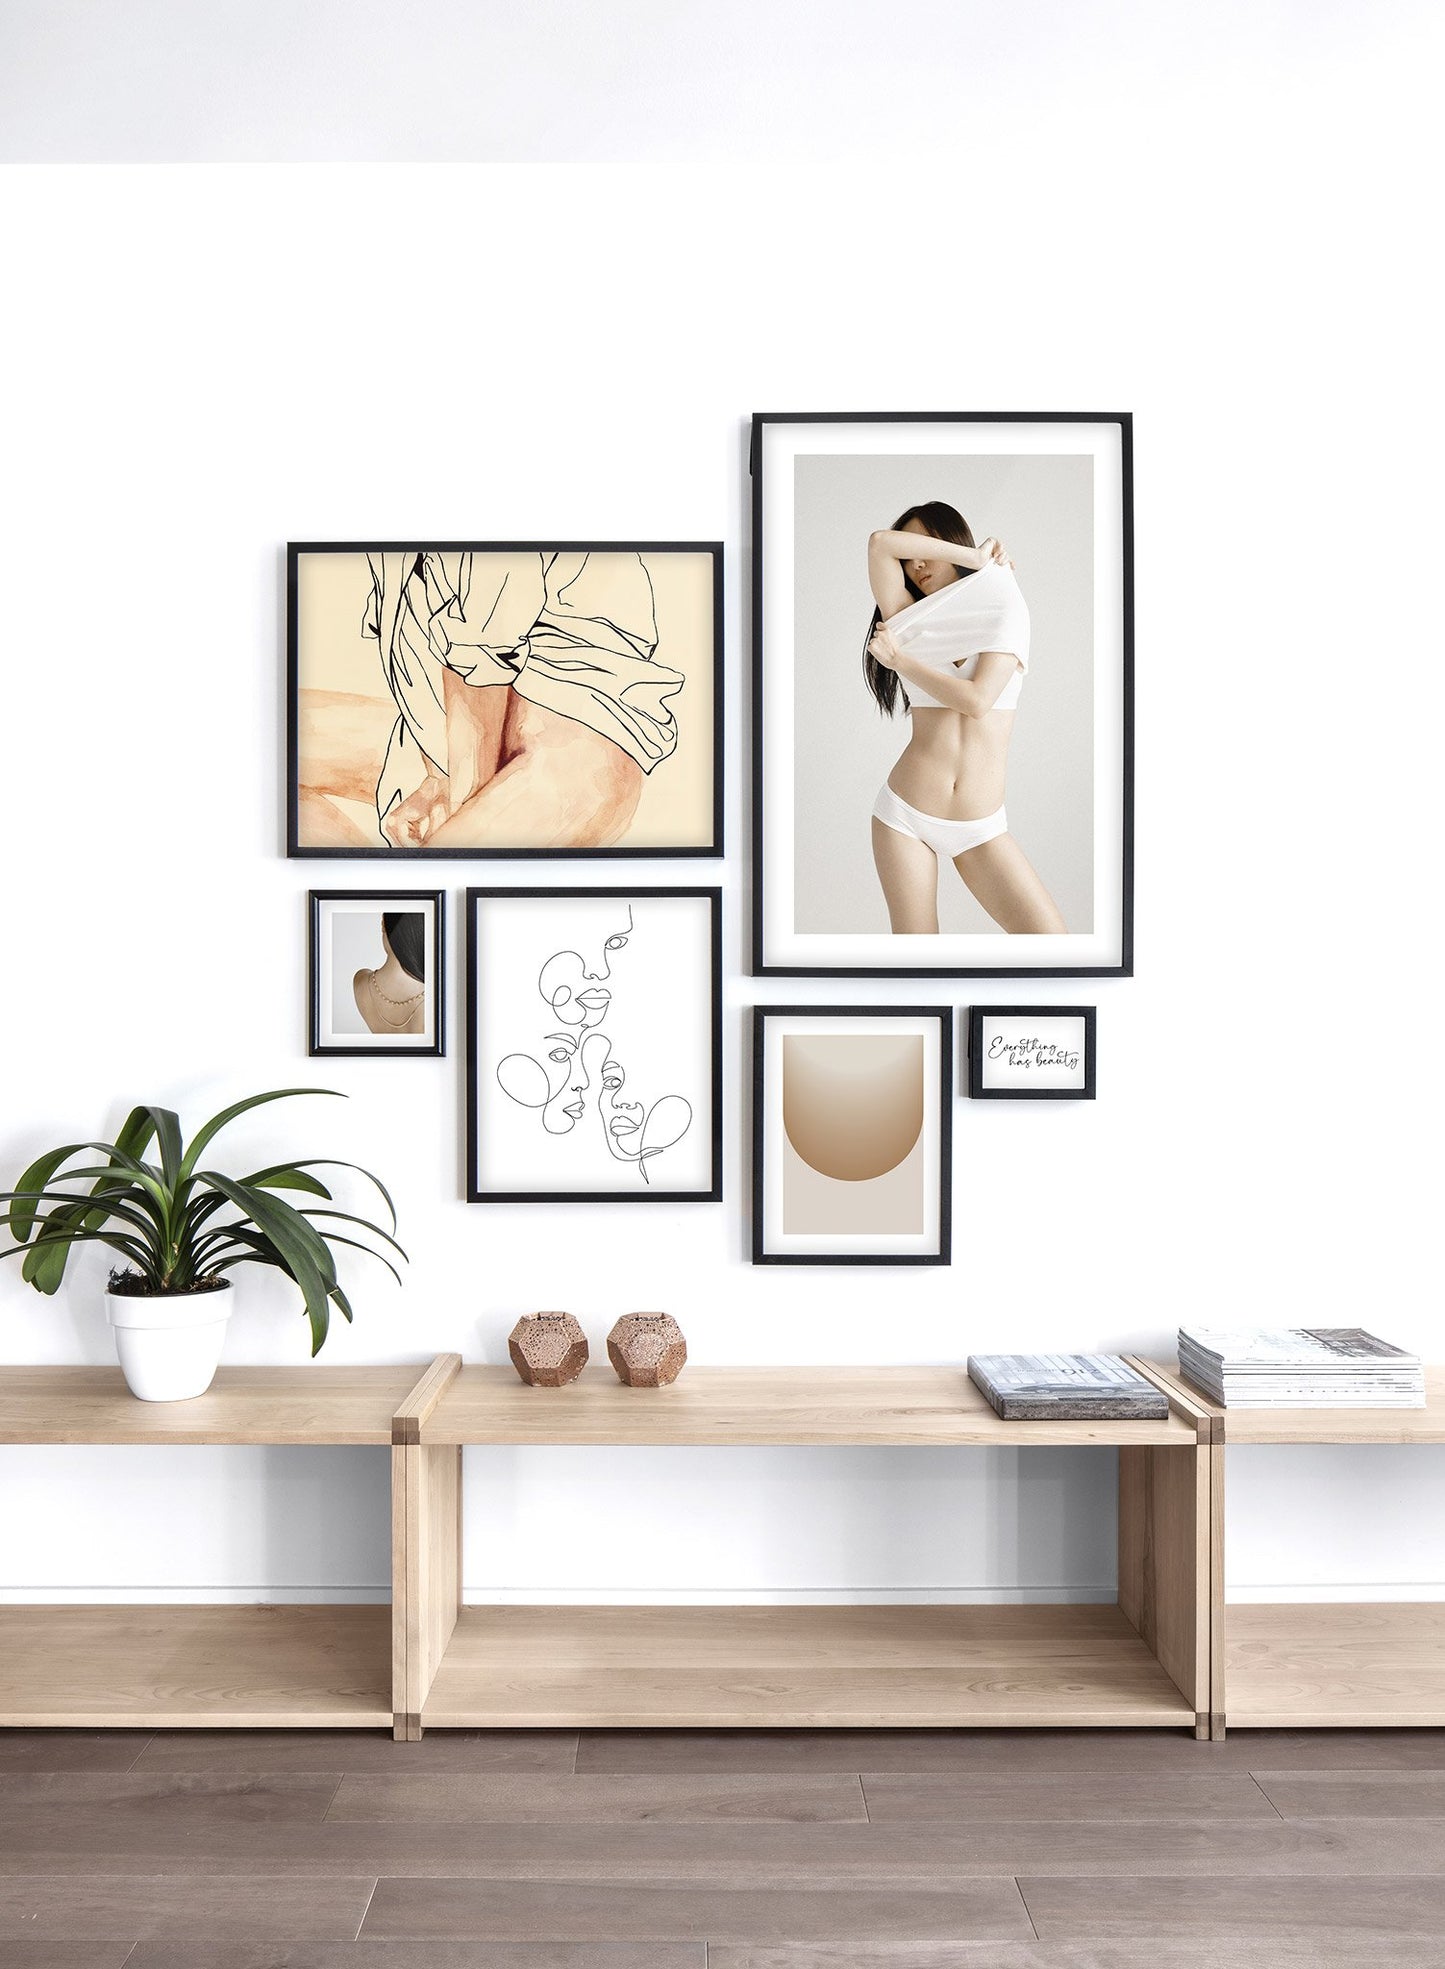 Fashion illustration poster by Opposite Wall with woman in loose shirt - Lifestyle Gallery - Living Room